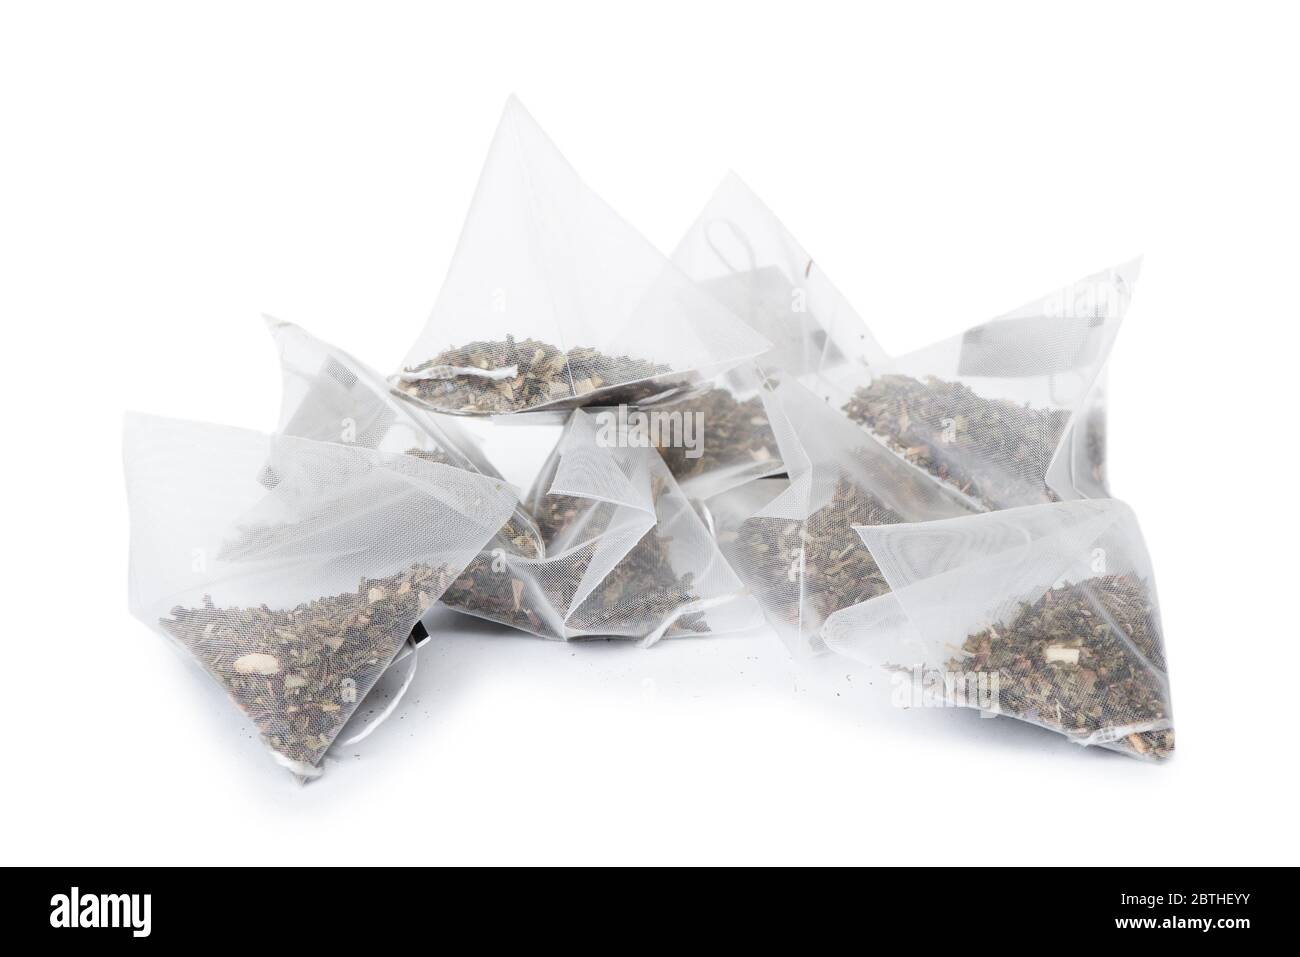 Download Page 2 Pyramid Tea Bag High Resolution Stock Photography And Images Alamy PSD Mockup Templates